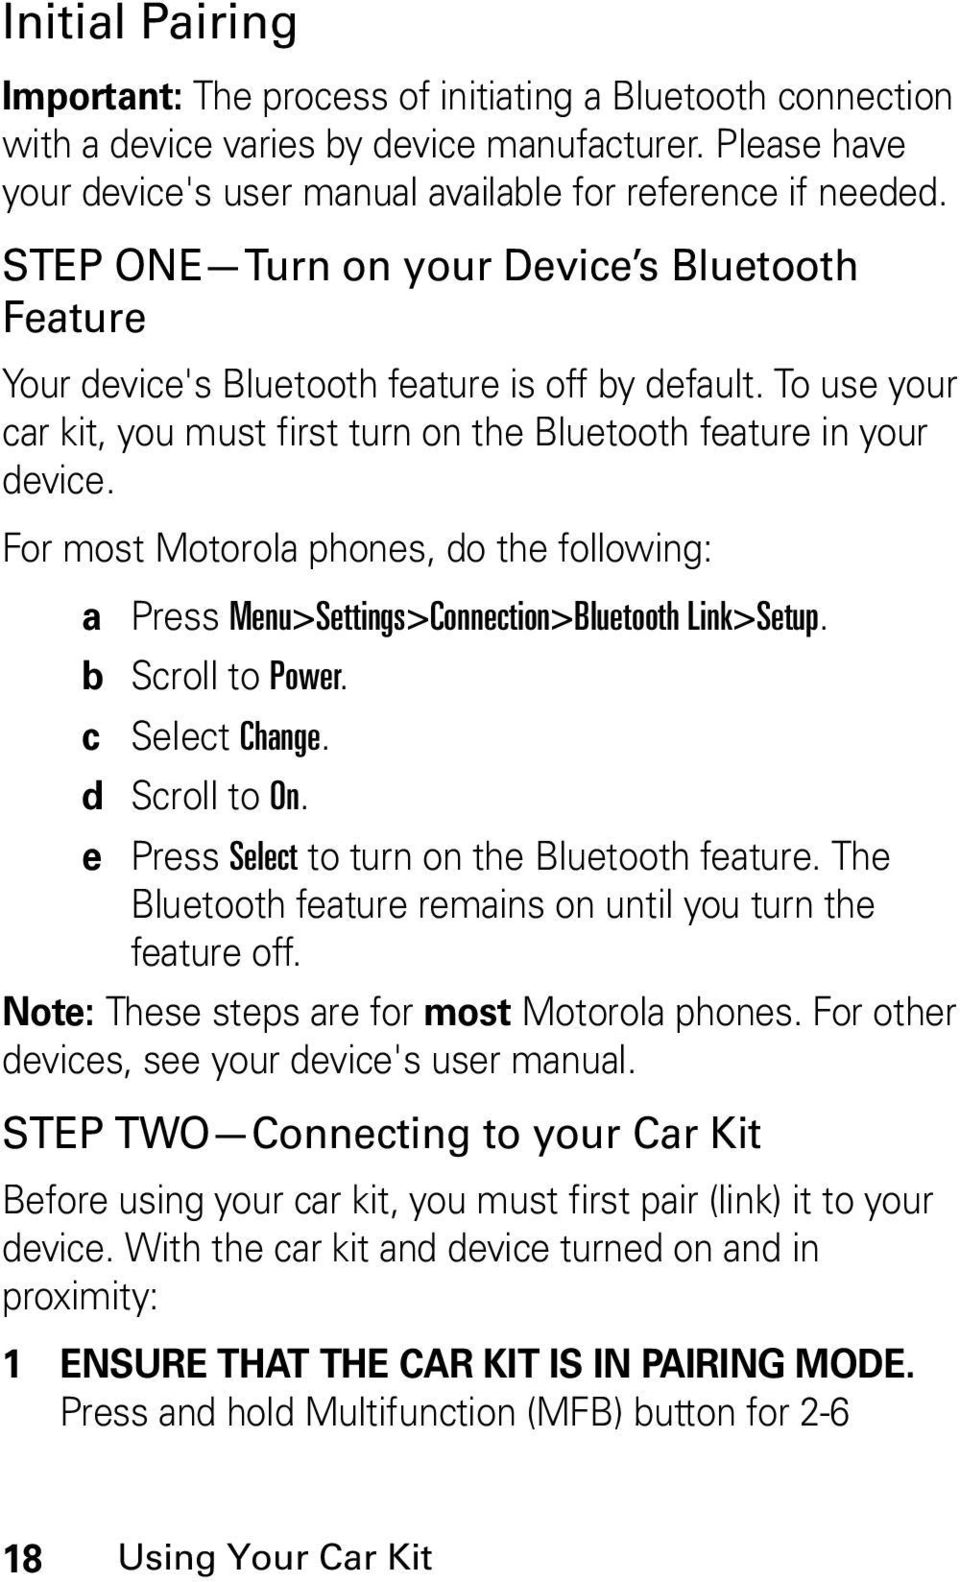 For most Motorola phones, do the following: a Press Menu>Settings>Connection>Bluetooth Link>Setup. b Scroll to Power. c Select Change. d Scroll to On. e Press Select to turn on the Bluetooth feature.